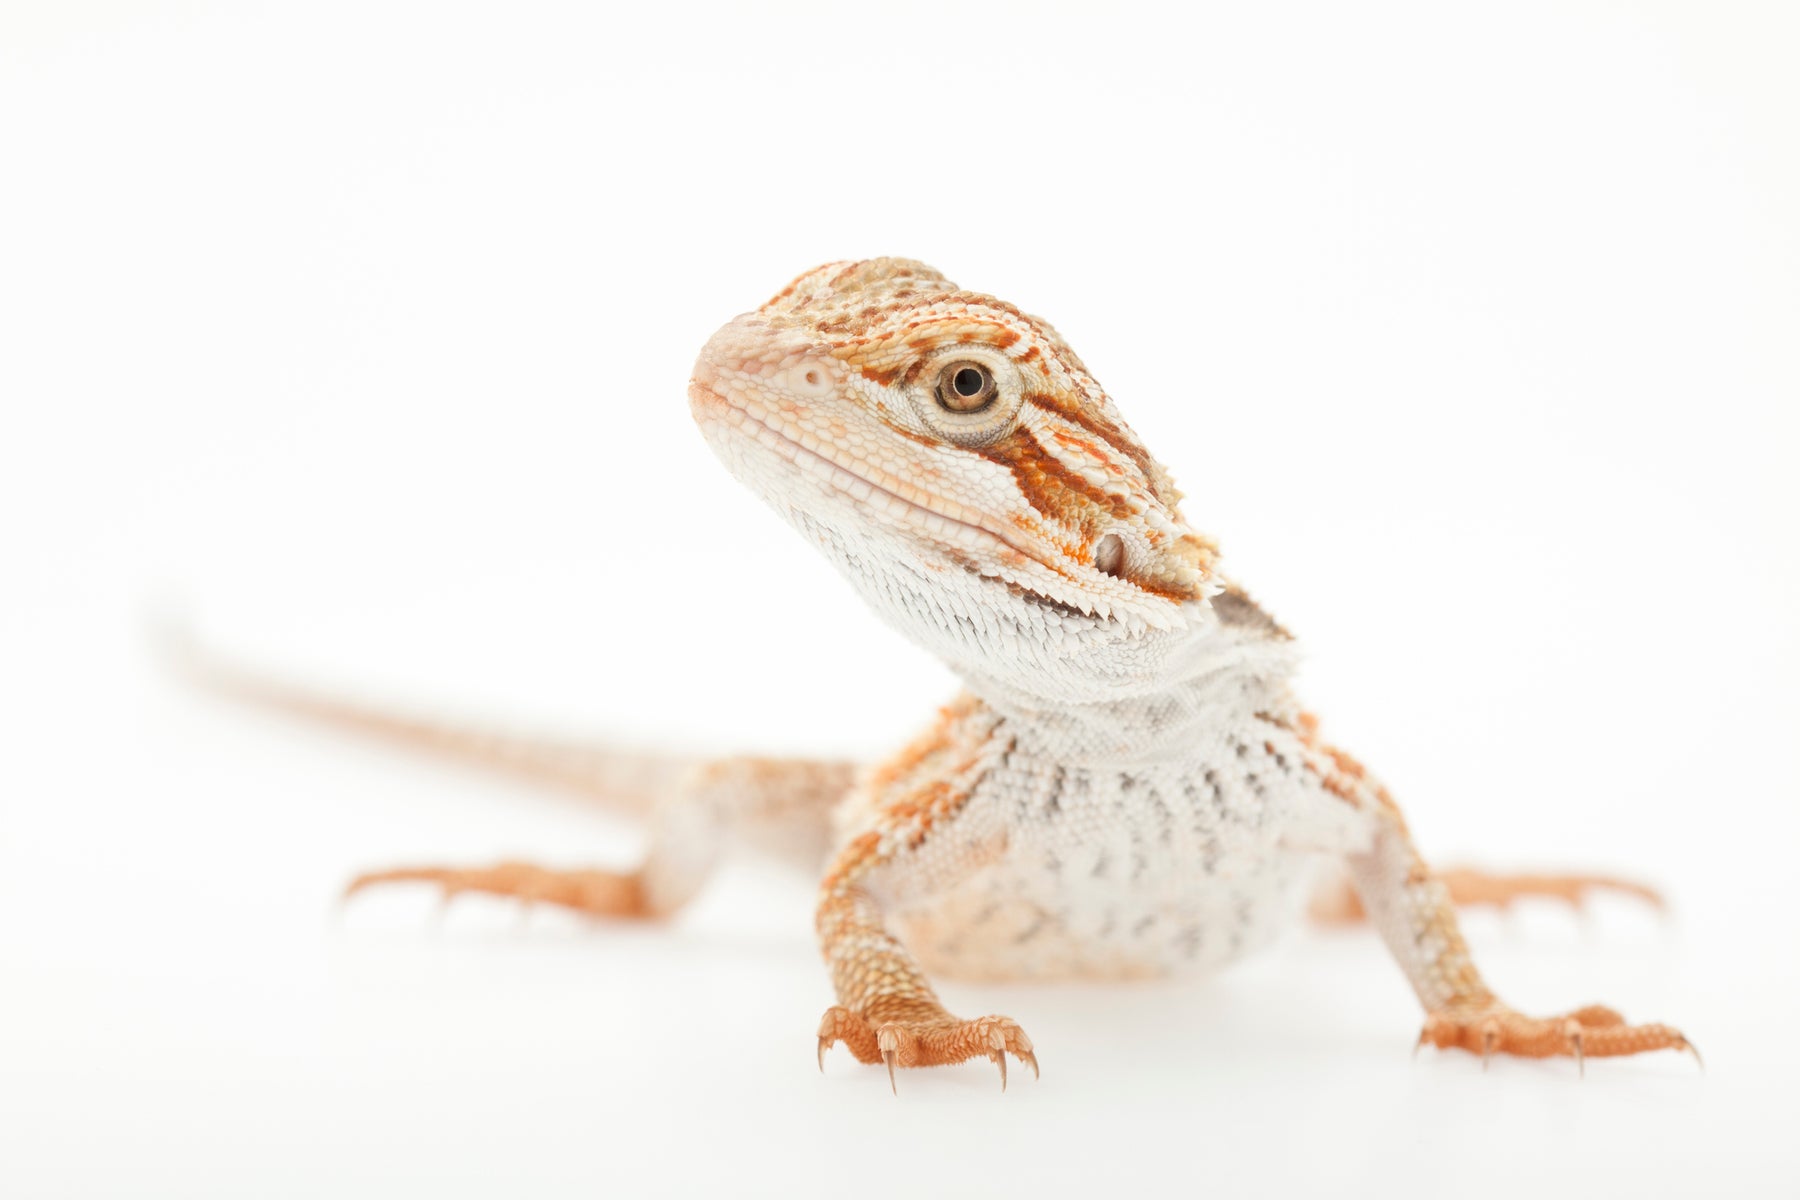 What Lighting Do I Need For My Bearded Dragon?